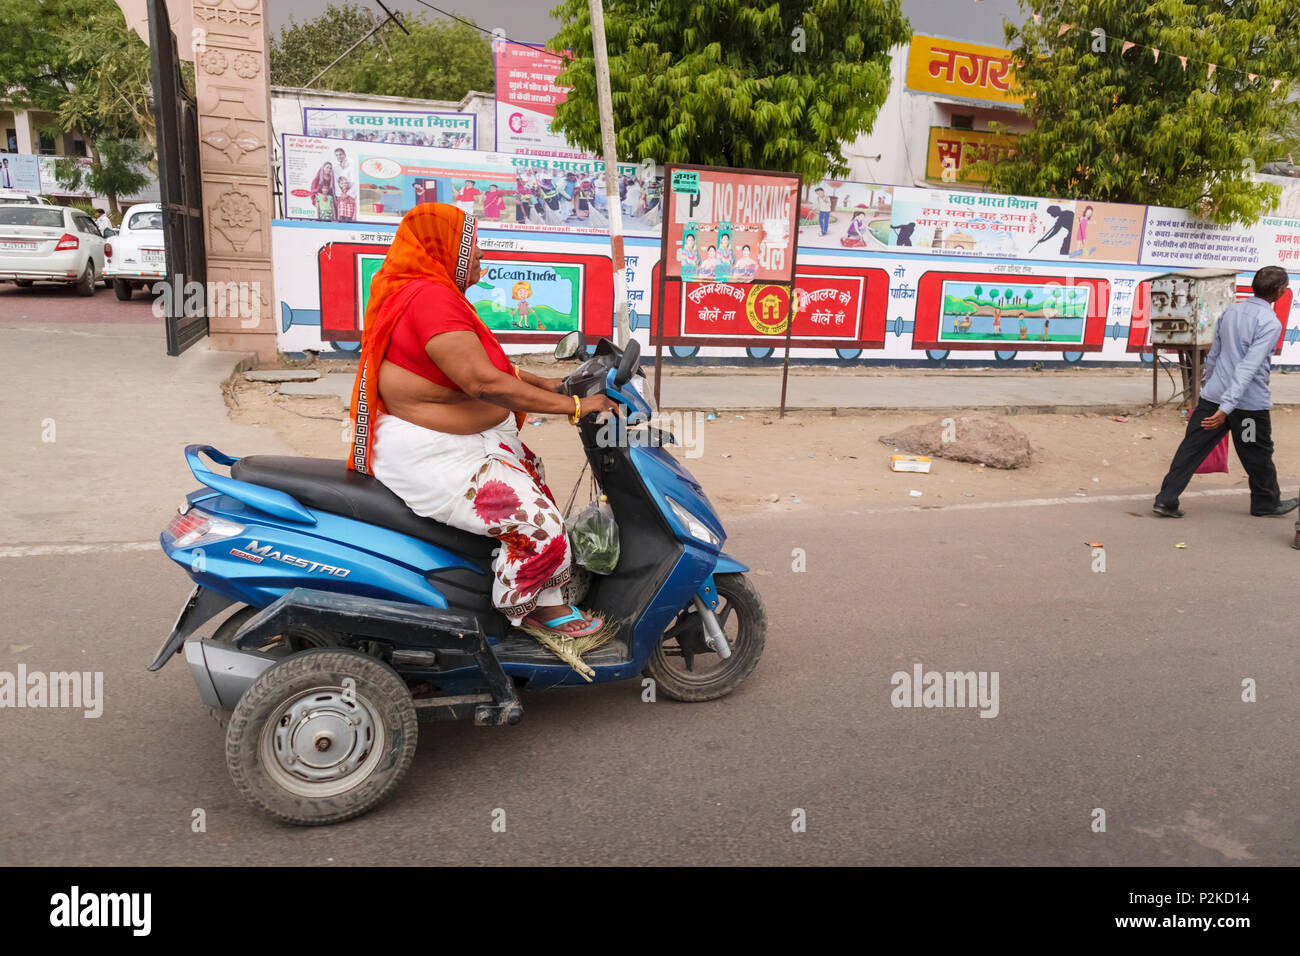 Fat obese senior local woman wearing typical traditional local clothing riding a three wheeled motorcycle in the street in Dausa, Rajasthan, India Stock Photo